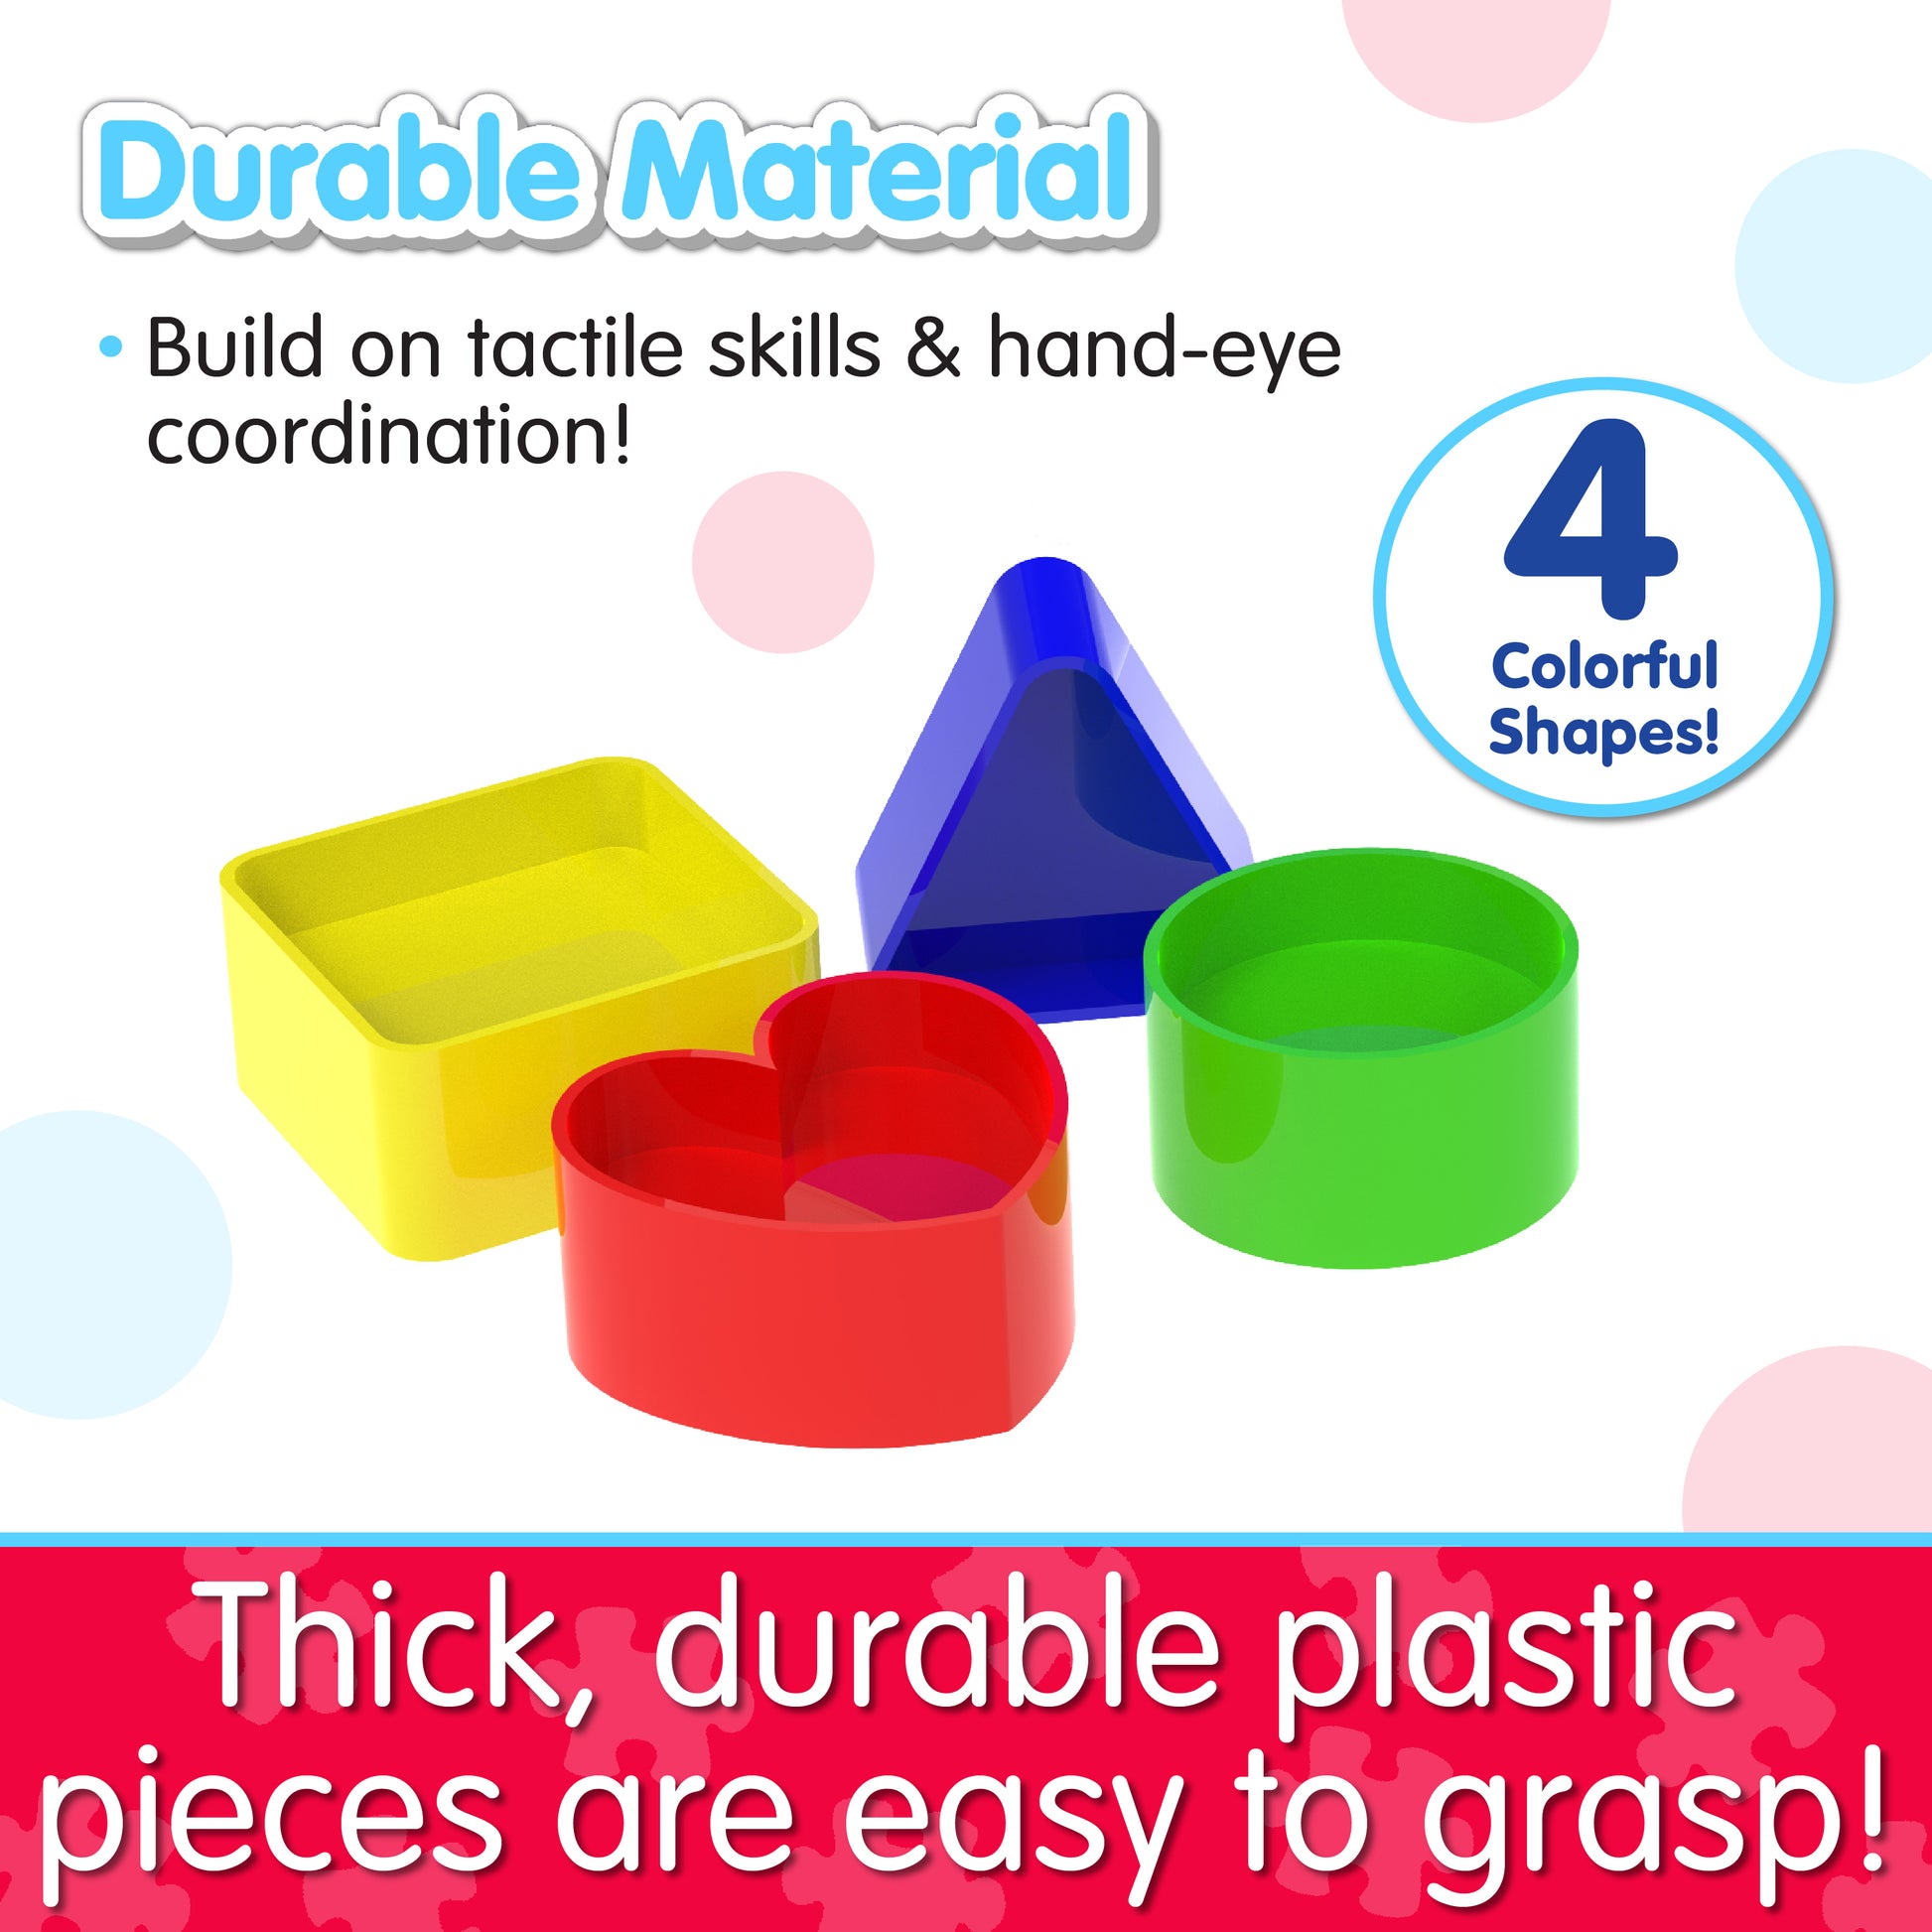 Infographic about Jumbo The Jet pieces that says, "Thick, durable plastic pieces are easy to grasp!"